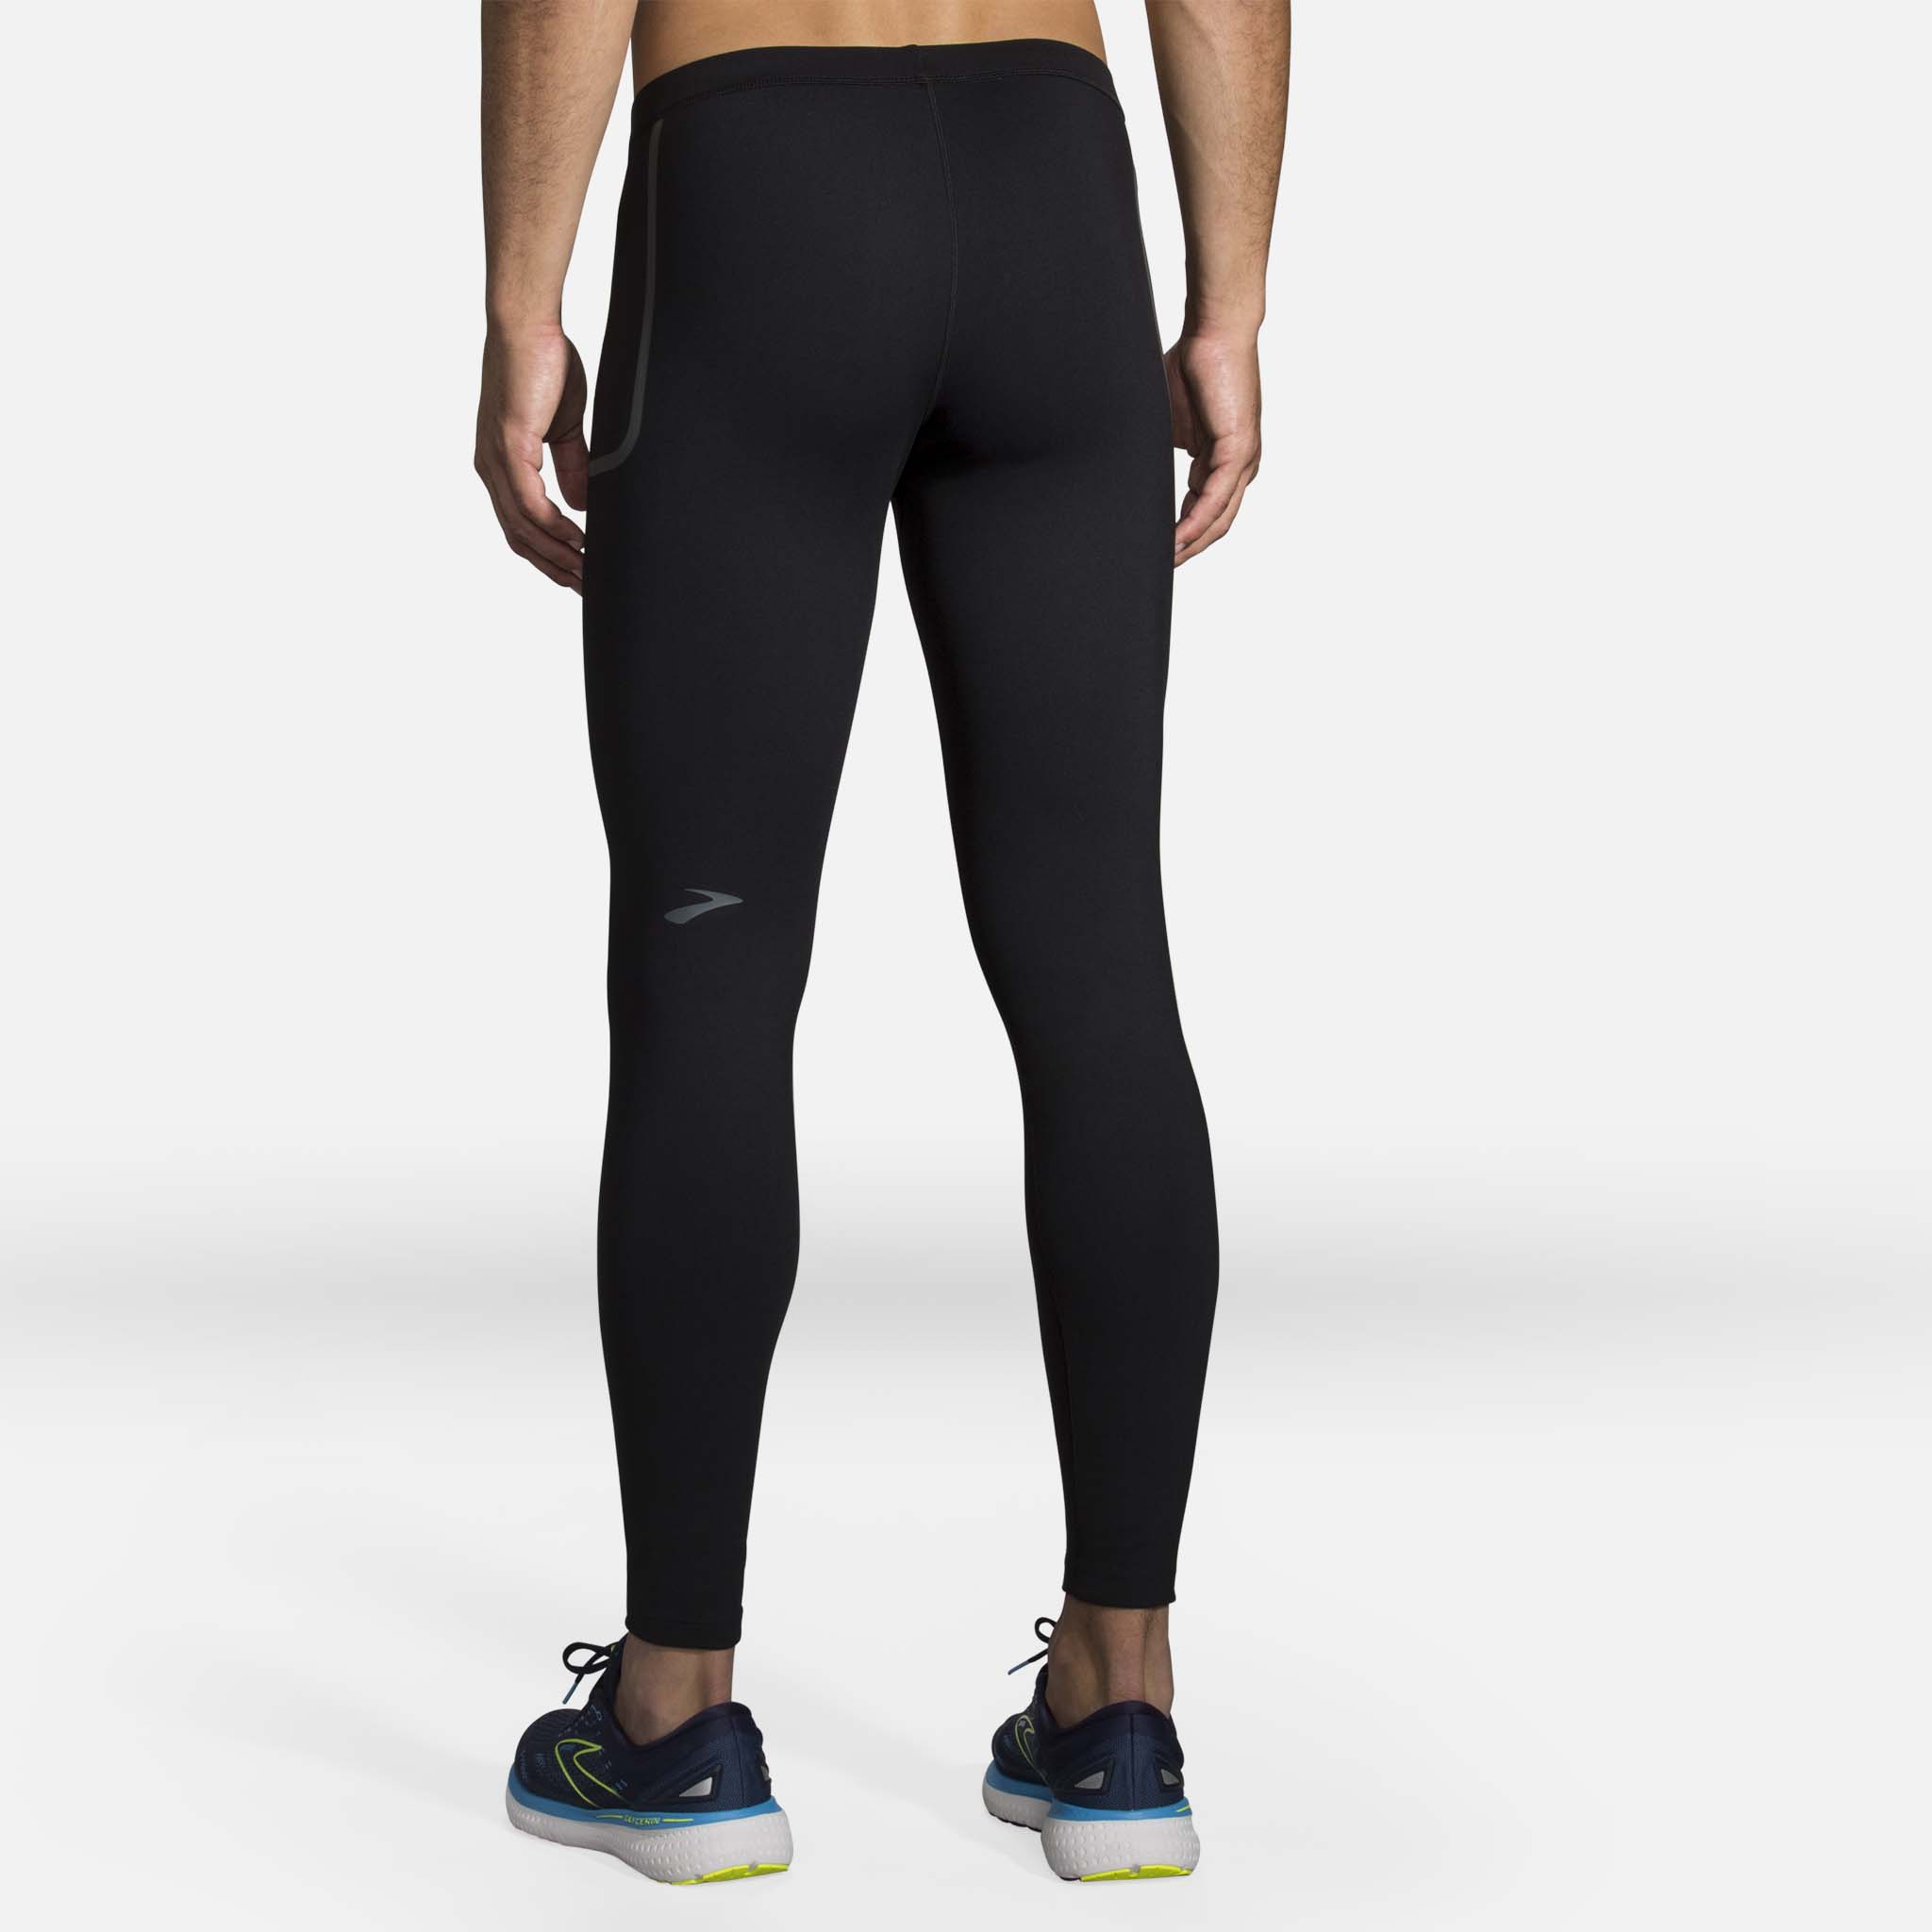 Shopstyle Lululemon - why I love to run and favorite running leggings |  Winter running outfit, Womens workout outfits, Cute running outfit